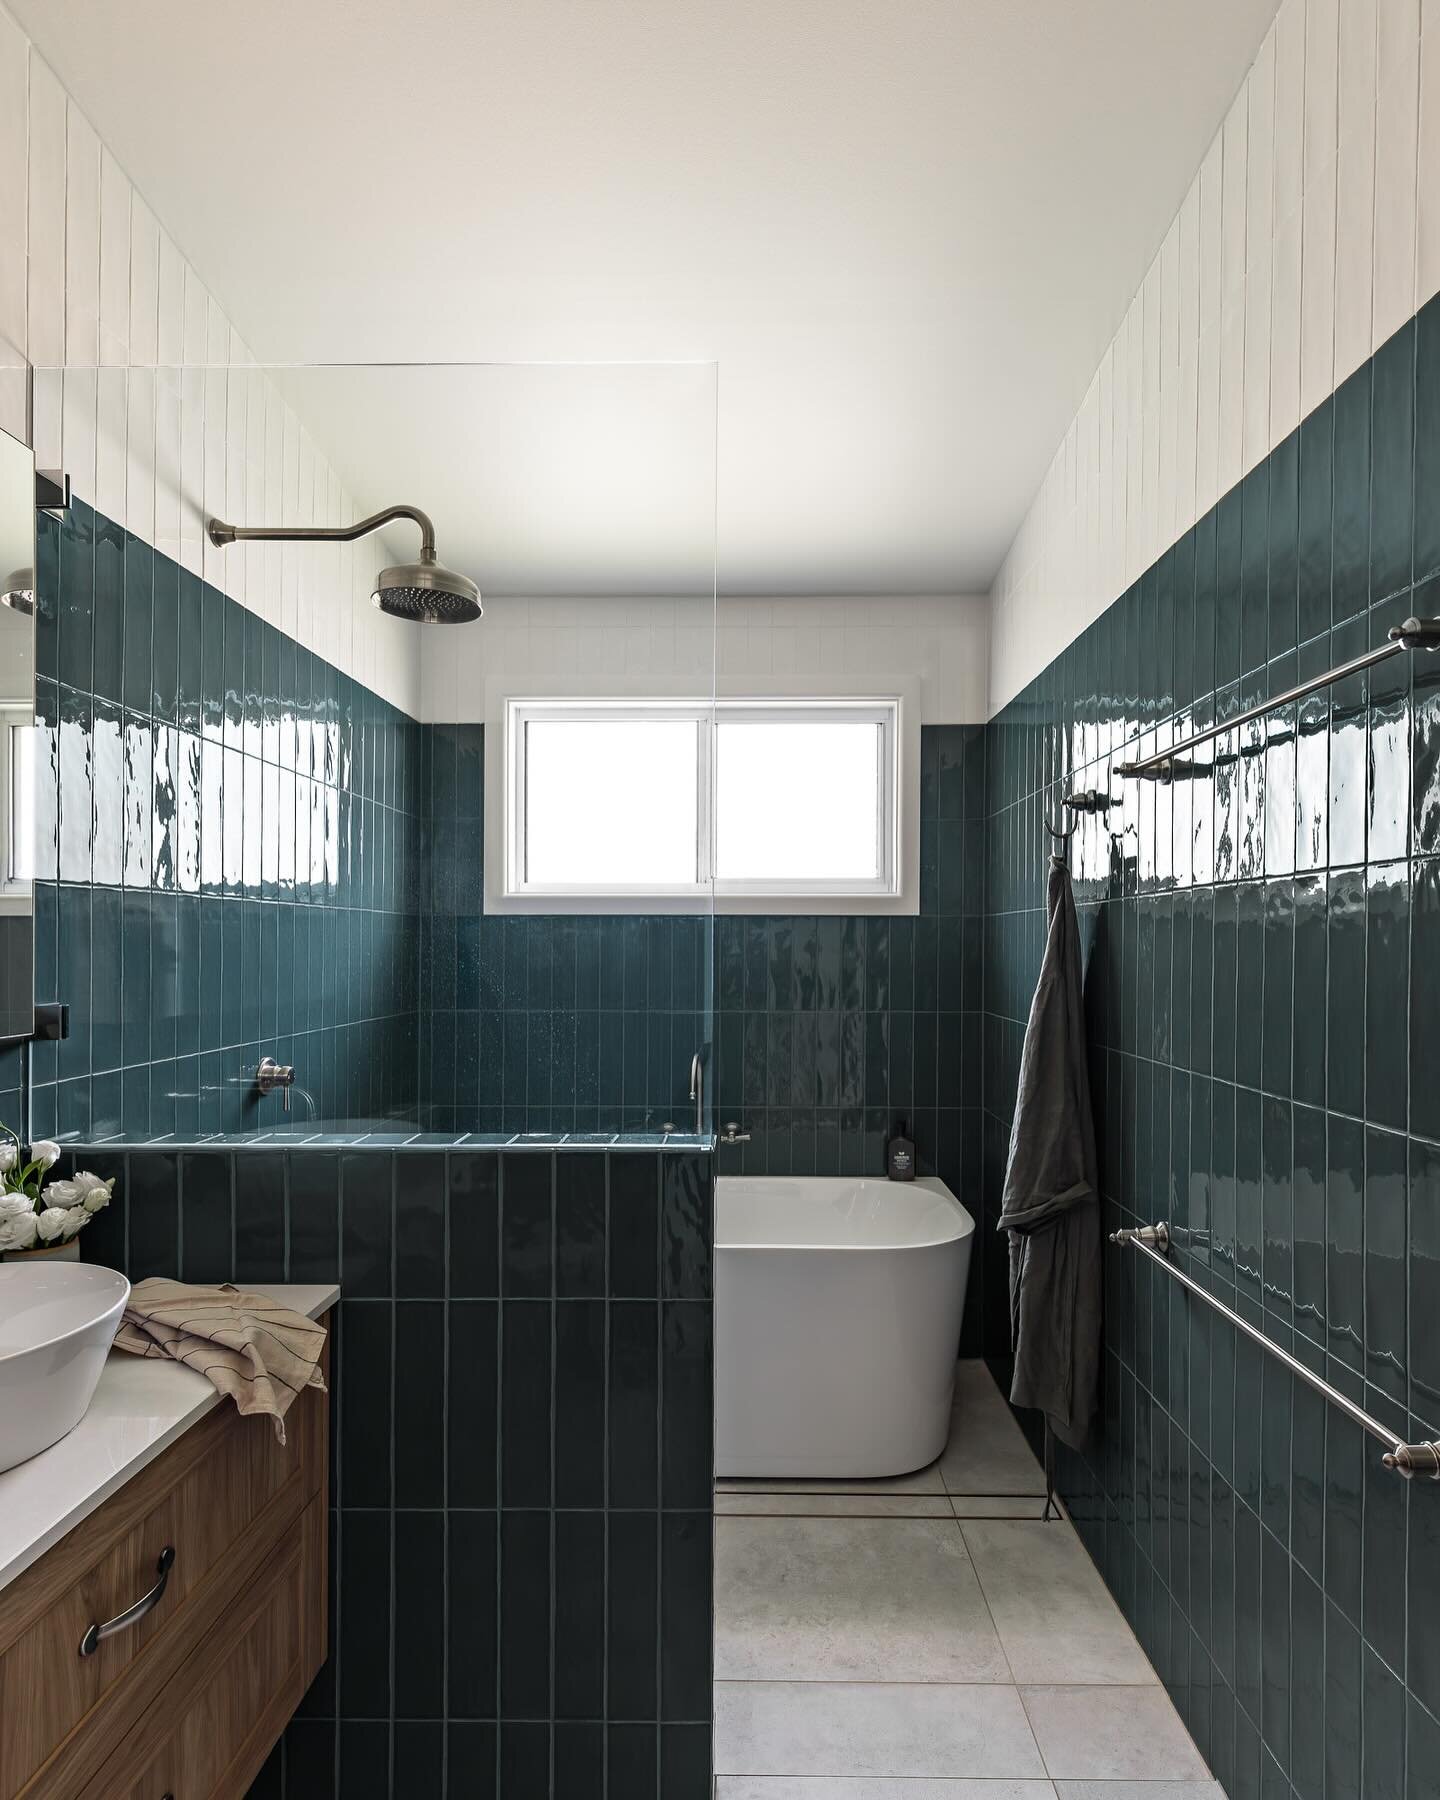 Bendalong Beach house | Main bathroom before and after. 

House - @oceanatbendalong 
Design - @sarah_yarrow 
Photo - @the.palm.co 

Book your stay at @whereweescape